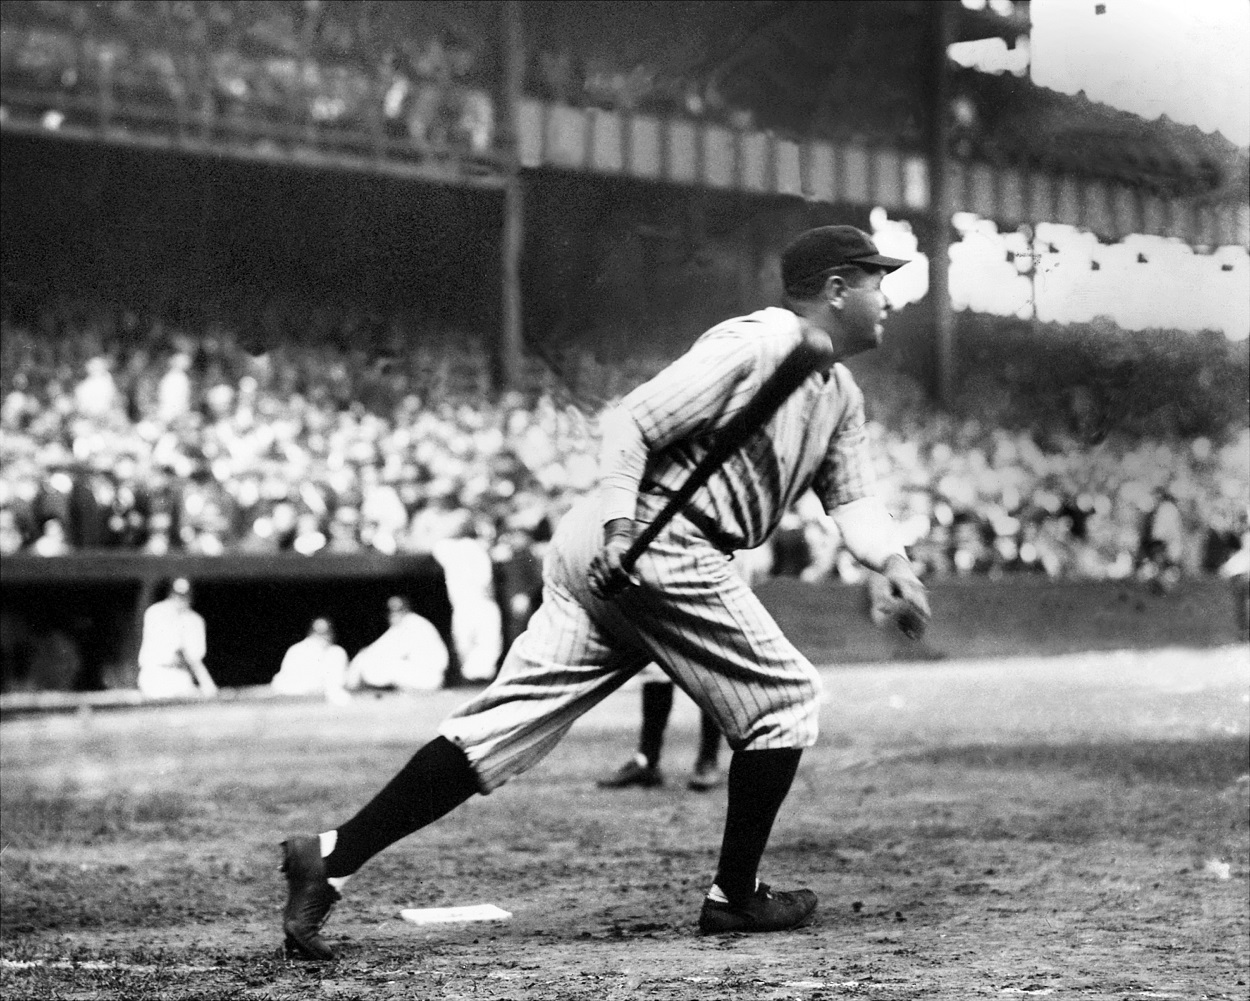 Babe Ruth Actually Hit 715 Home Runs During His MLB Career and Was